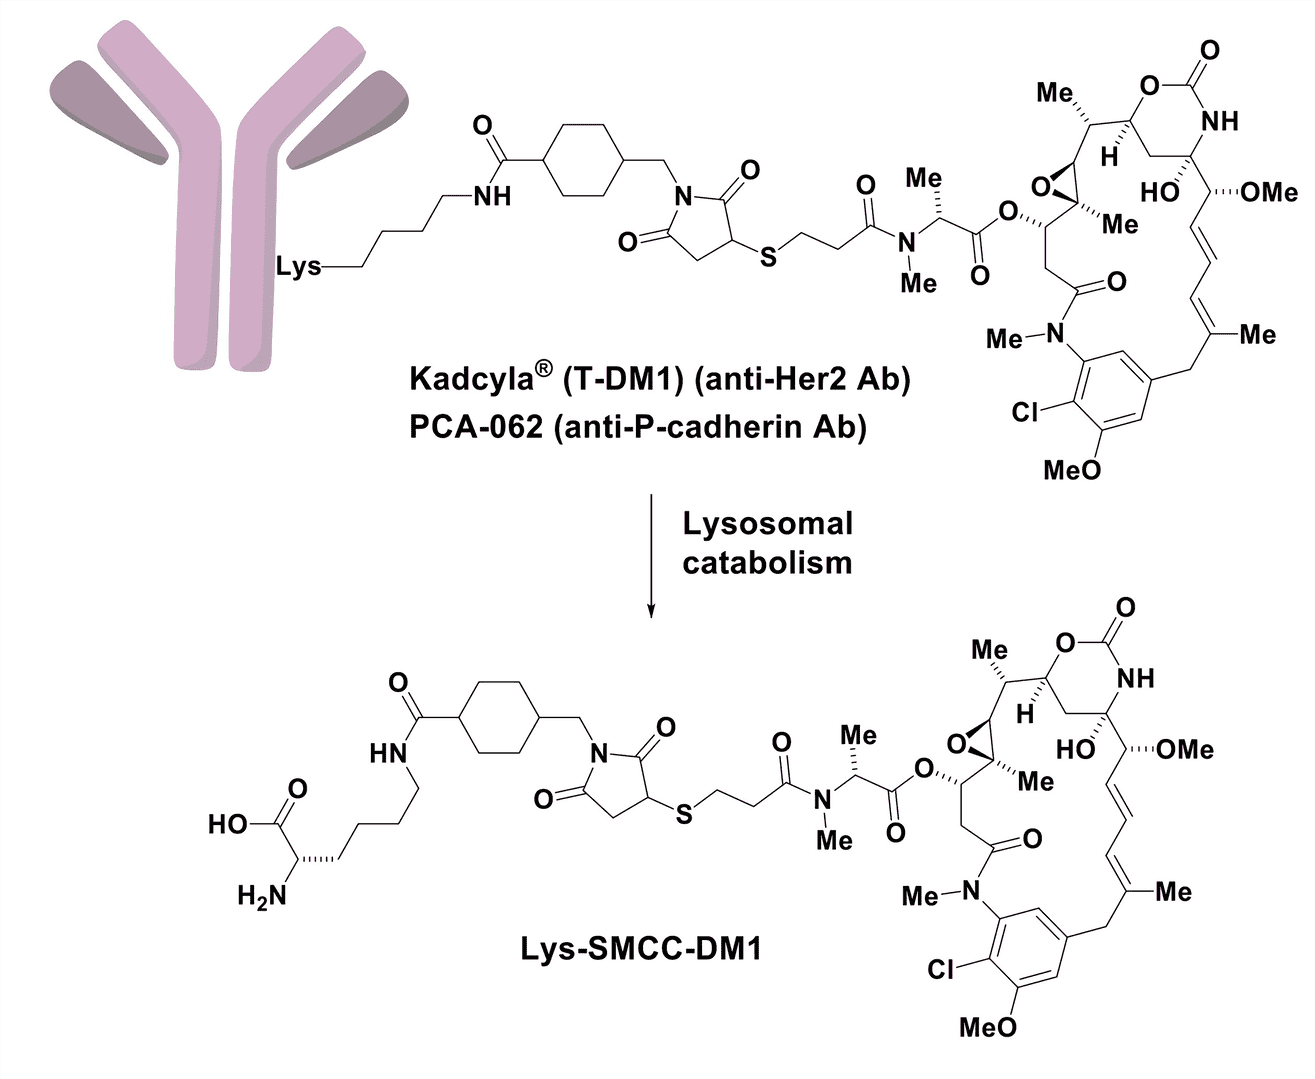 Structures of Trastuzumab emtansine and PCA-062.